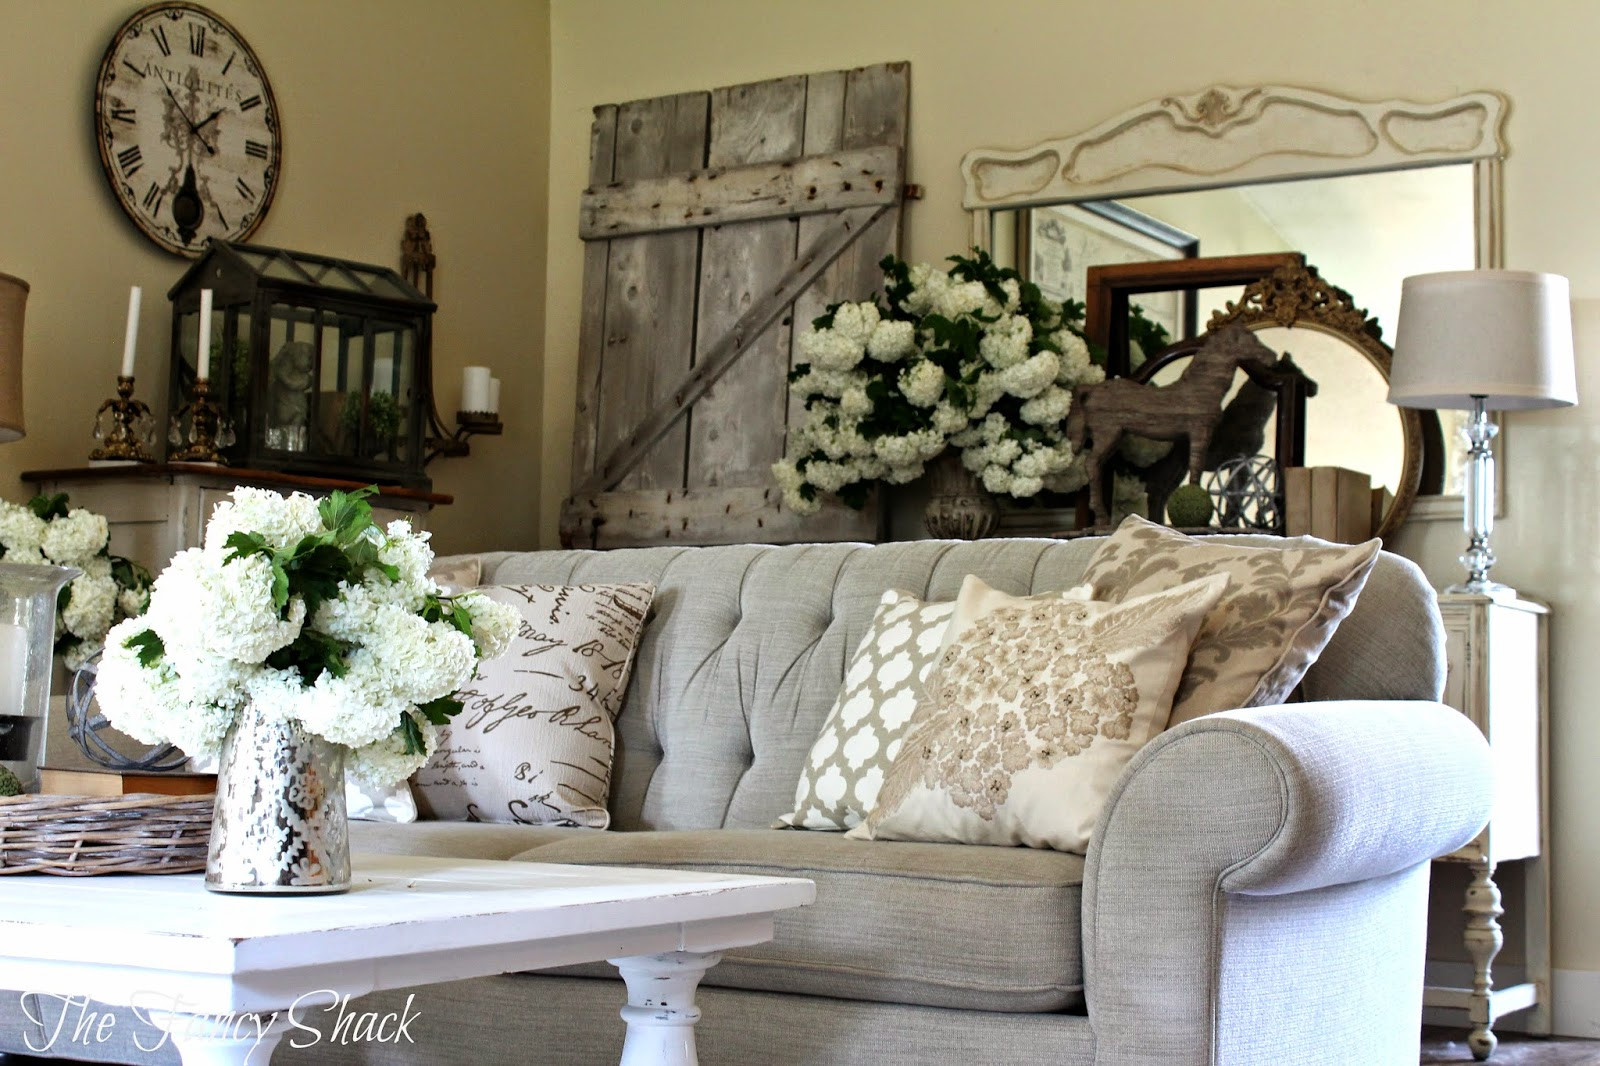 Rustic Shabby Chic Living Room
 The Fancy Shack New Living Room Furniture